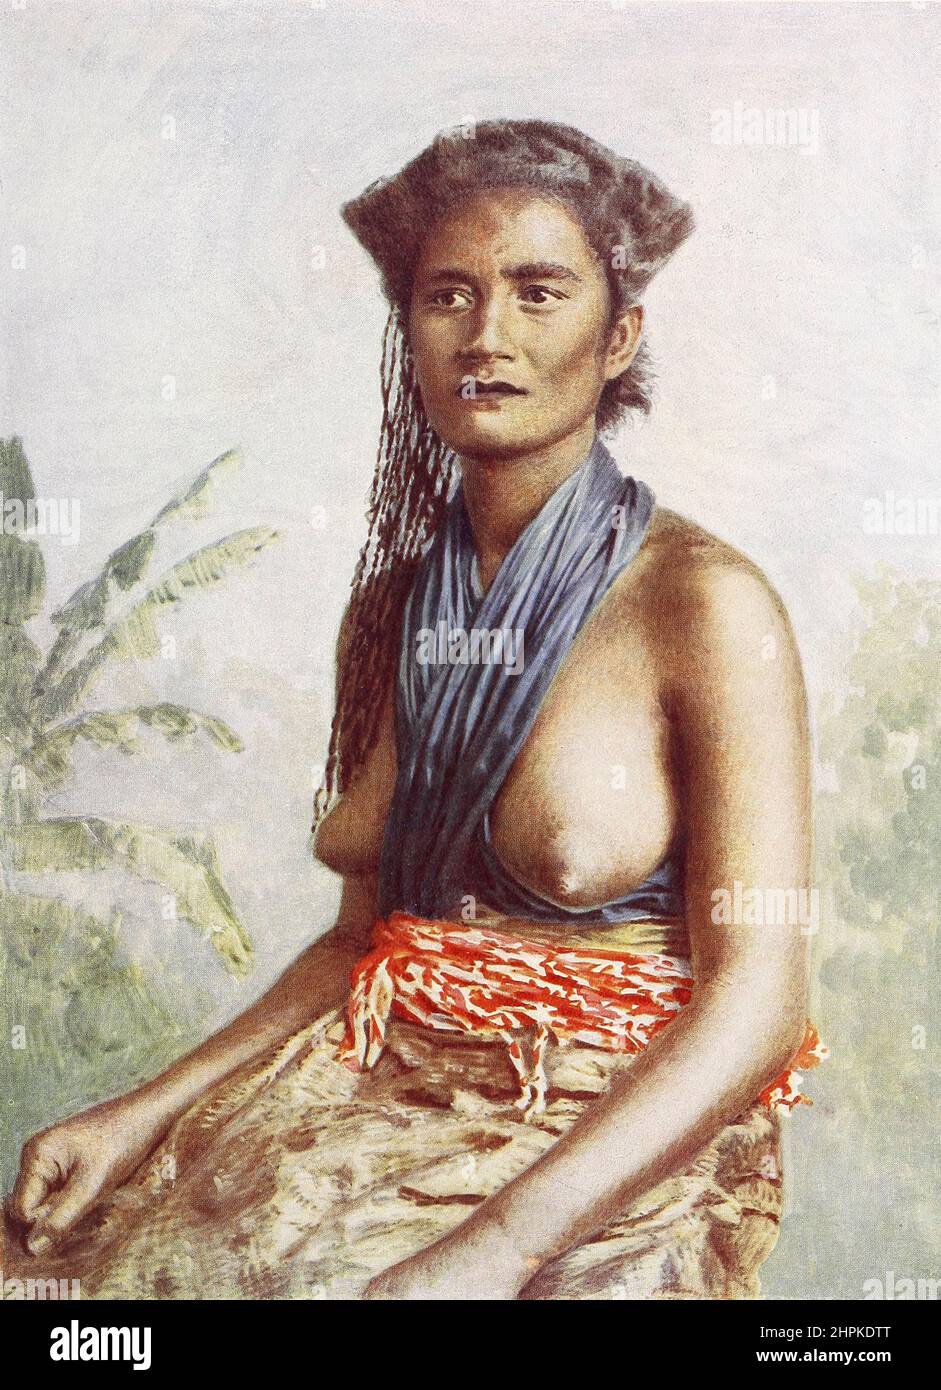 Portrait of a Fijian Woman in traditional dress from The living races of mankind : a popular illustrated account of the customs, habits, pursuits, feasts & ceremonies of the races of mankind throughout the world Volume 1 by Sir Harry Hamilton Johnston, Henry Neville Hutchinson, Richard Lydekker and Dr. A. H. Keane published London : Hutchinson & Co. 1902 Stock Photo